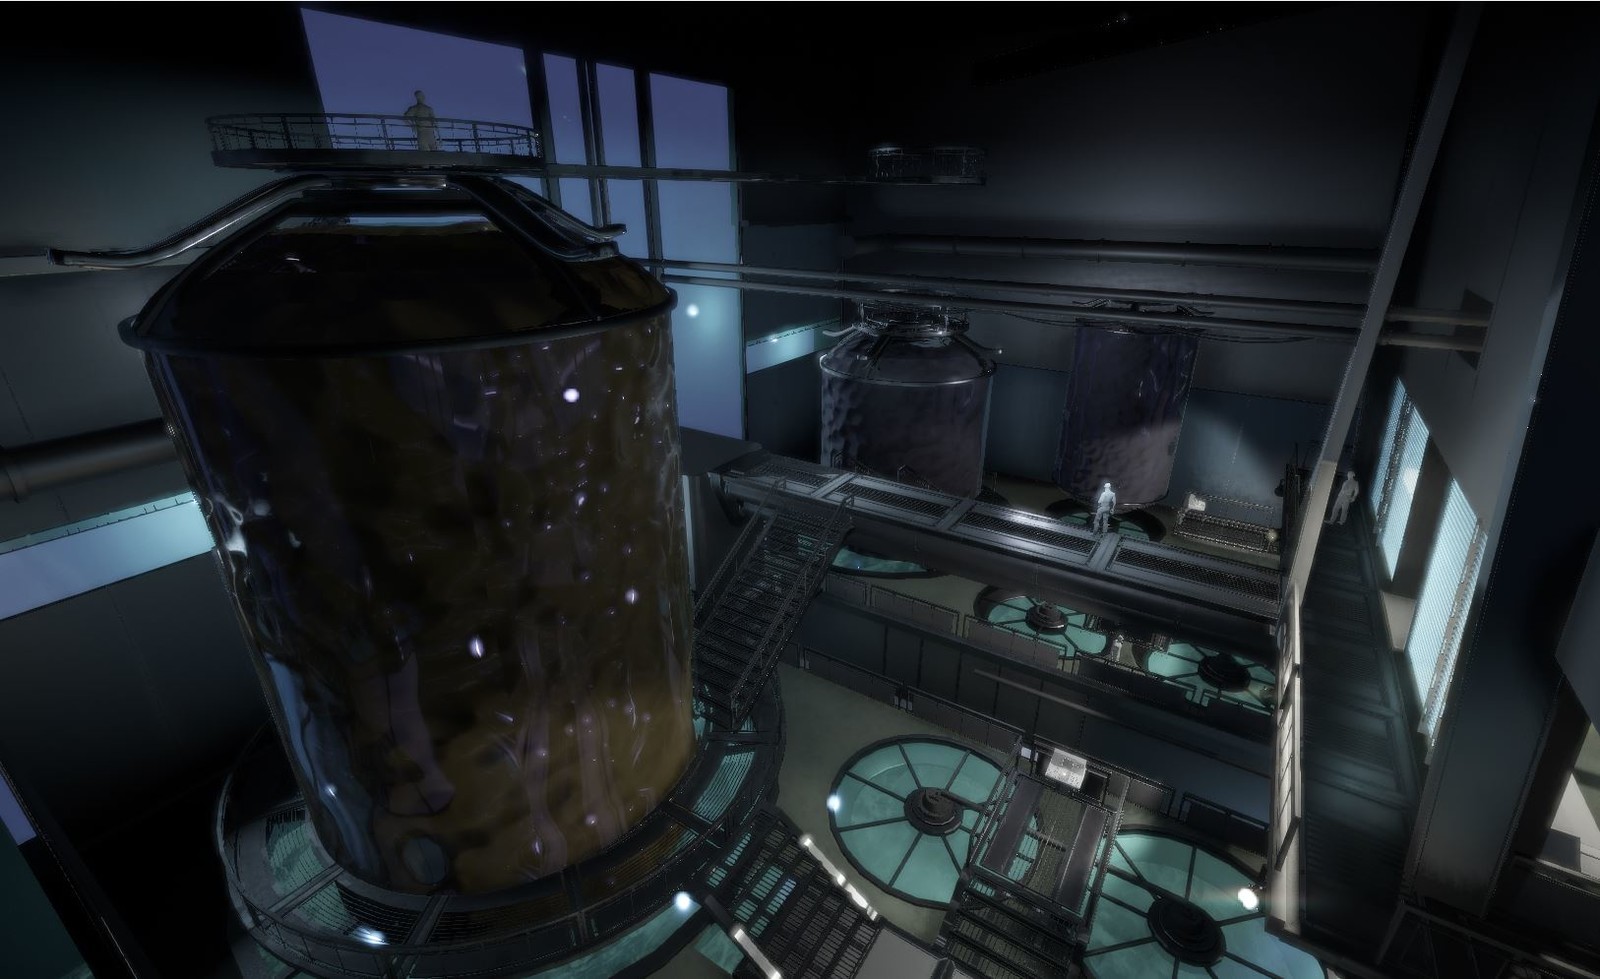 Water treatment previs.  Poop in the tank, and a water treatment facility below.  Creating a good Scalar balance was so hard, esp with so many things to take in mentally at one time.  